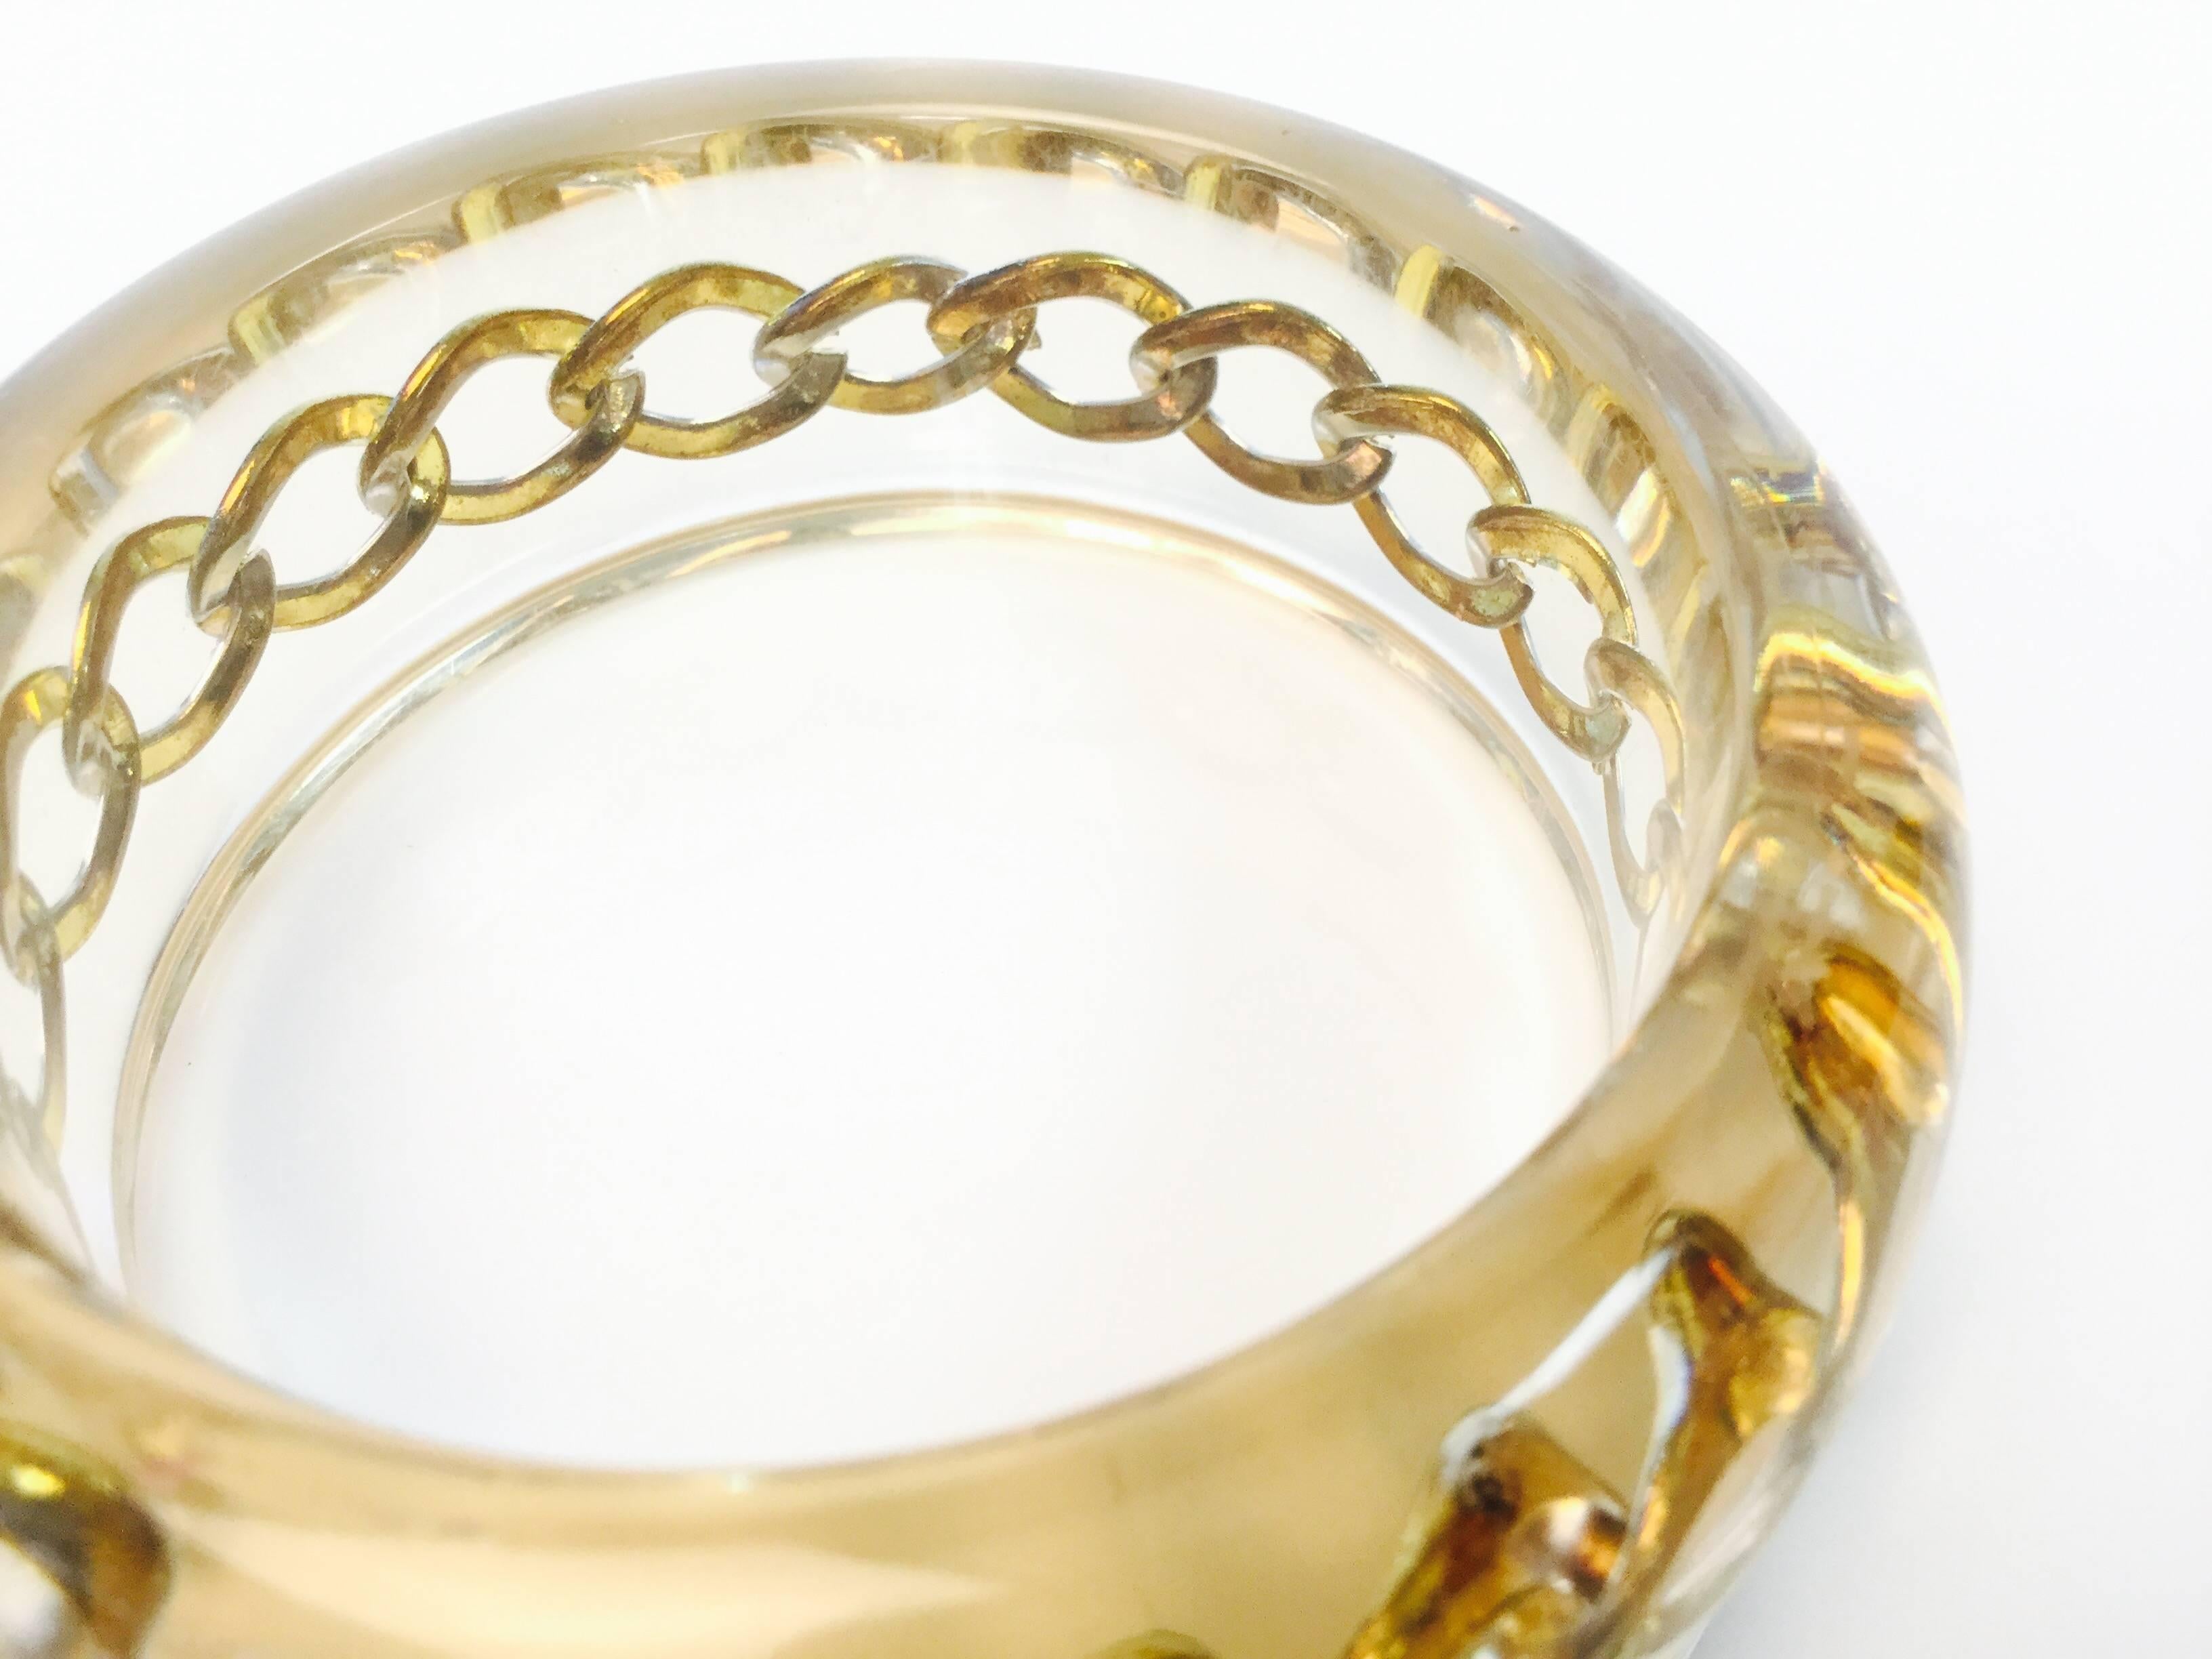 
Fantastic 1980s Lucite curb chain bangle. The bangle features a gold-tone curb chain bracelet suspended in the center of a lucite bangle. The chain links are encased in a thin bubble of air, causing the outline of the chain to lightly shimmer. The